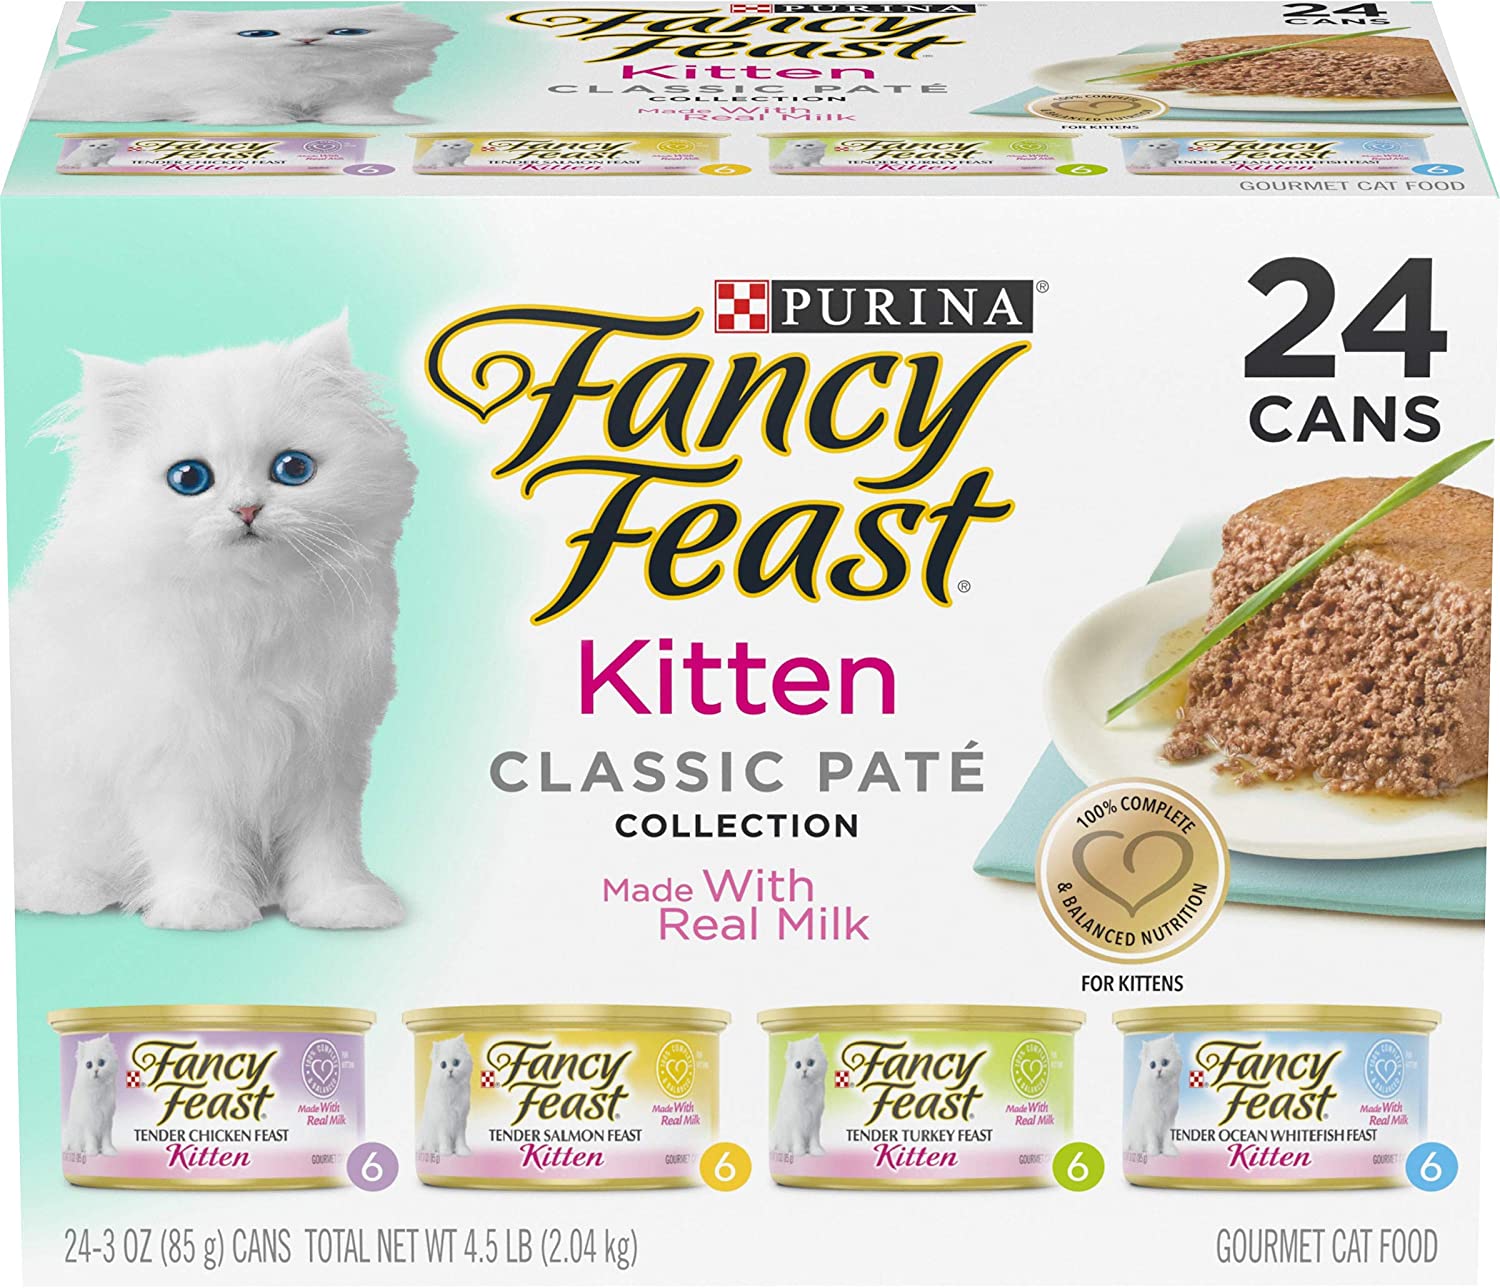 Purina Fancy Feast Grain Free Pate Wet Kitten Food Variety Pack, Kitten Classic Pate Collection, 4 Flavors - (24) 3 oz.